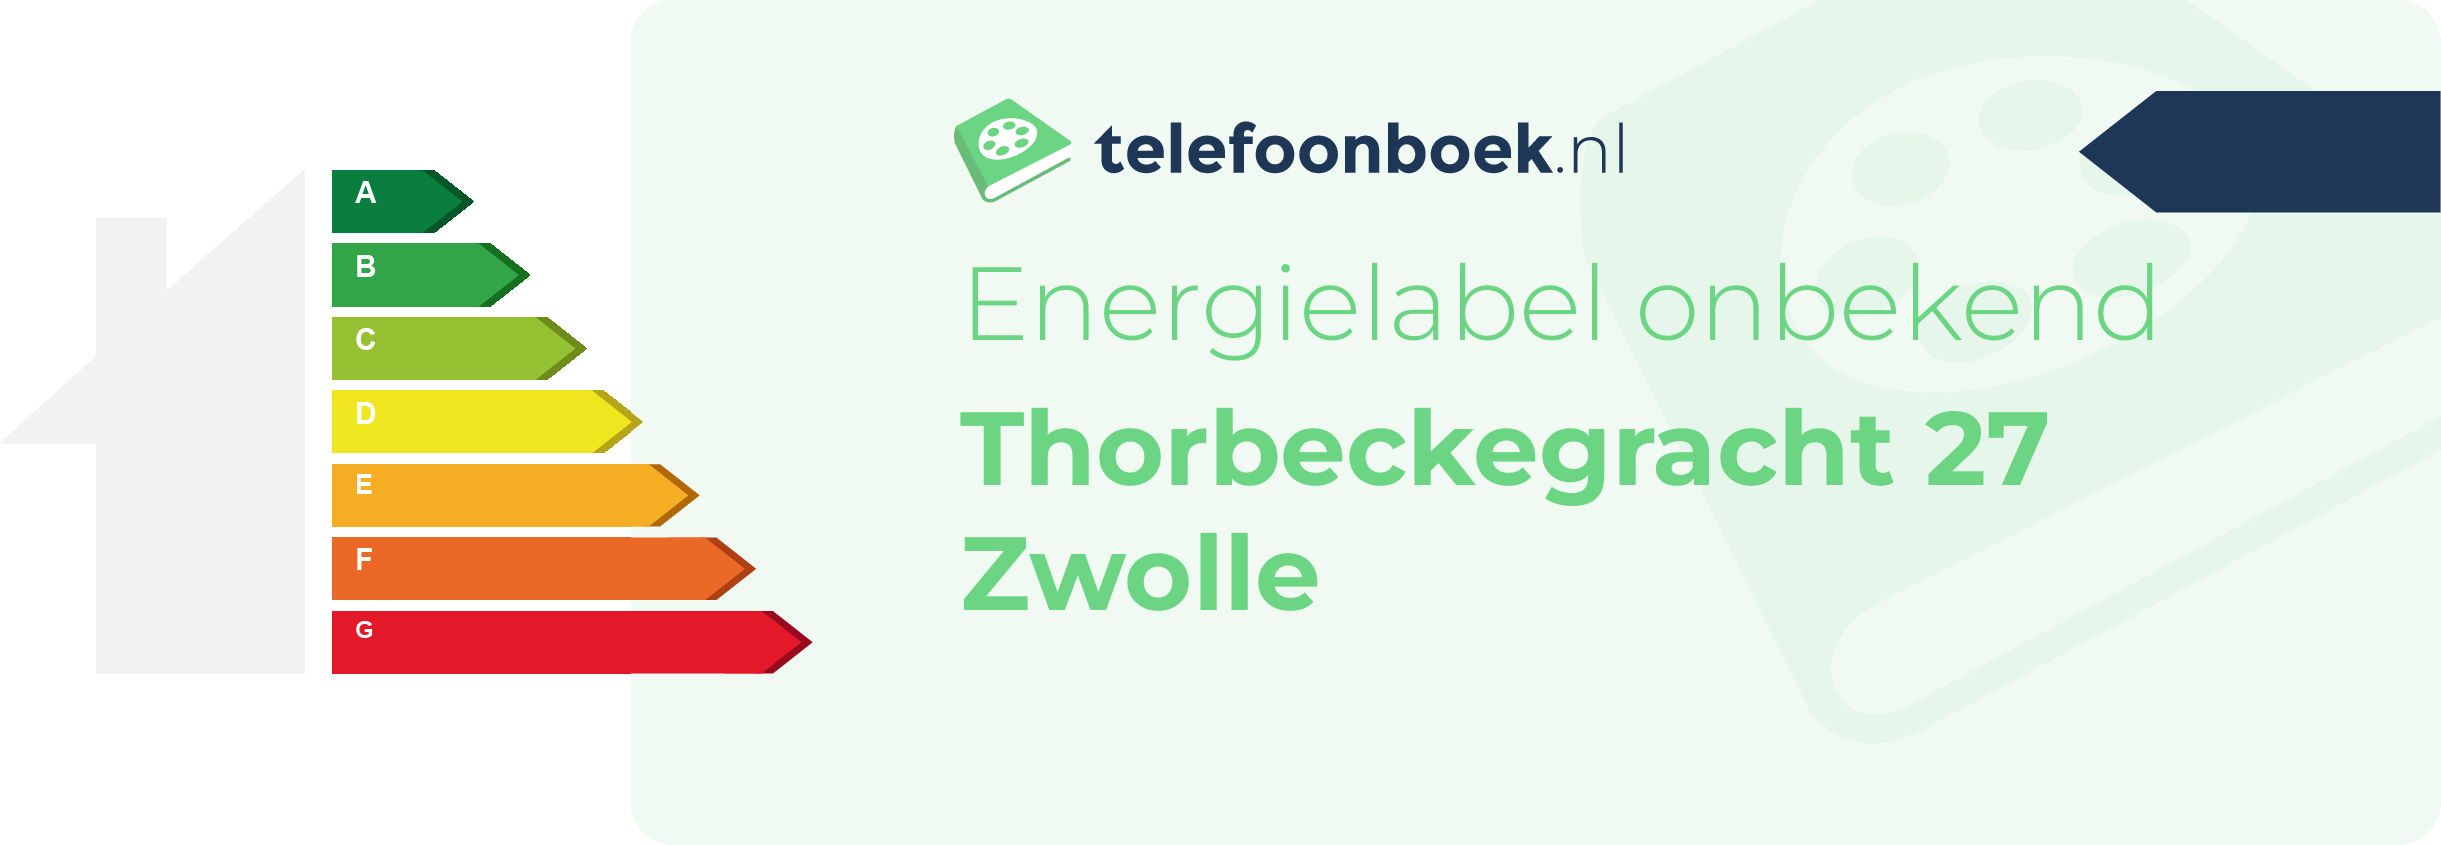 Energielabel Thorbeckegracht 27 Zwolle